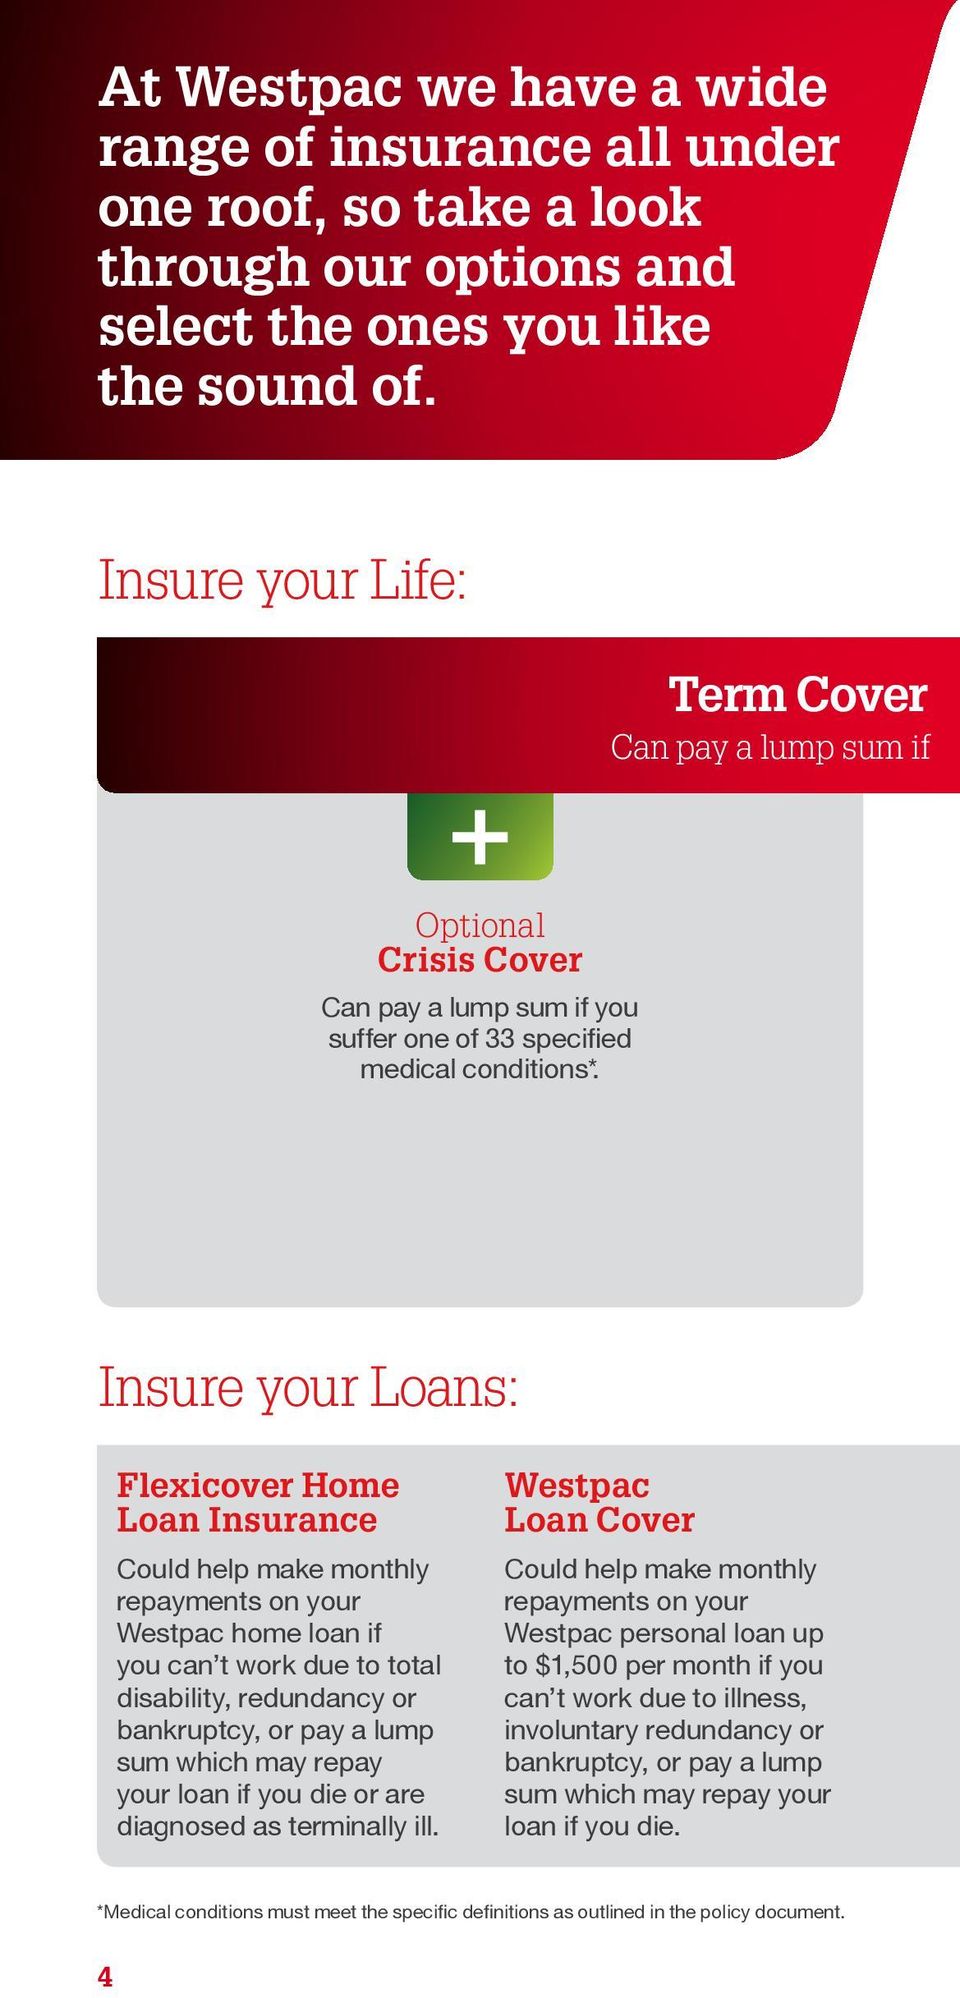 Insure your Loans: Flexicover Home Loan Insurance Could help make monthly repayments on your Westpac home loan if you can t work due to total disability, redundancy or bankruptcy, or pay a lump sum